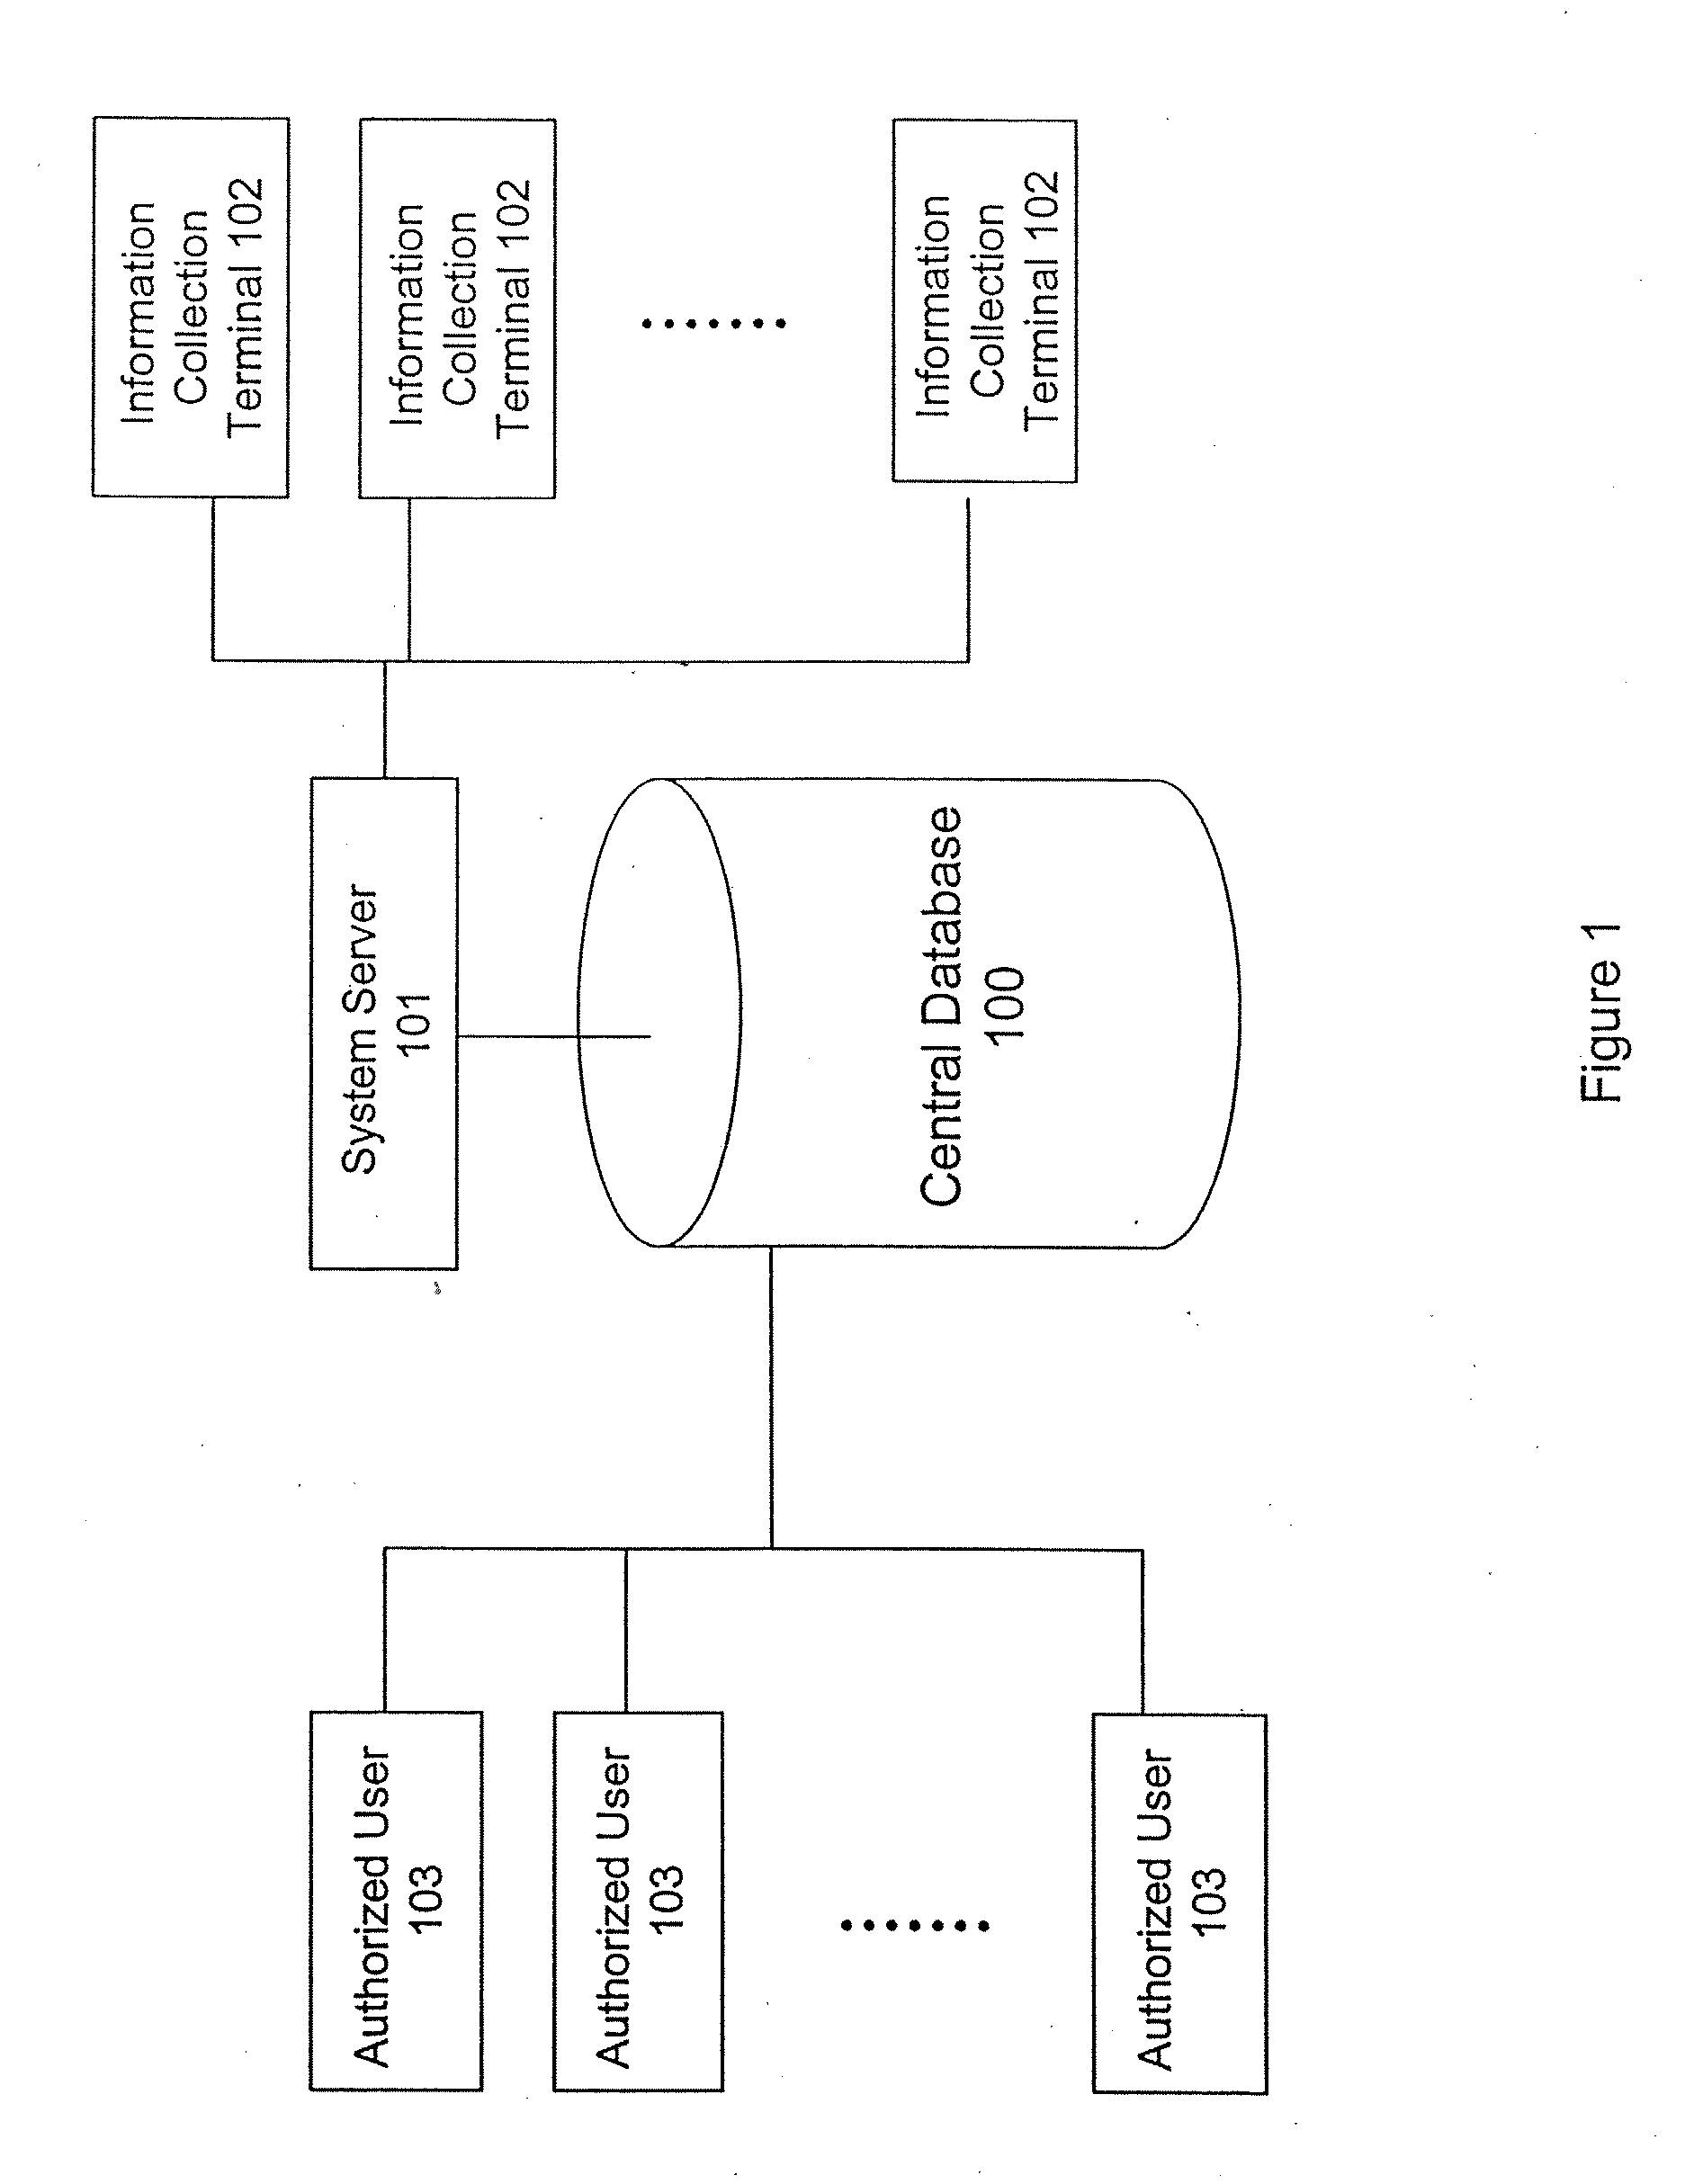 System and Method for Building and Manipulating a Centralized Measurement Value Database